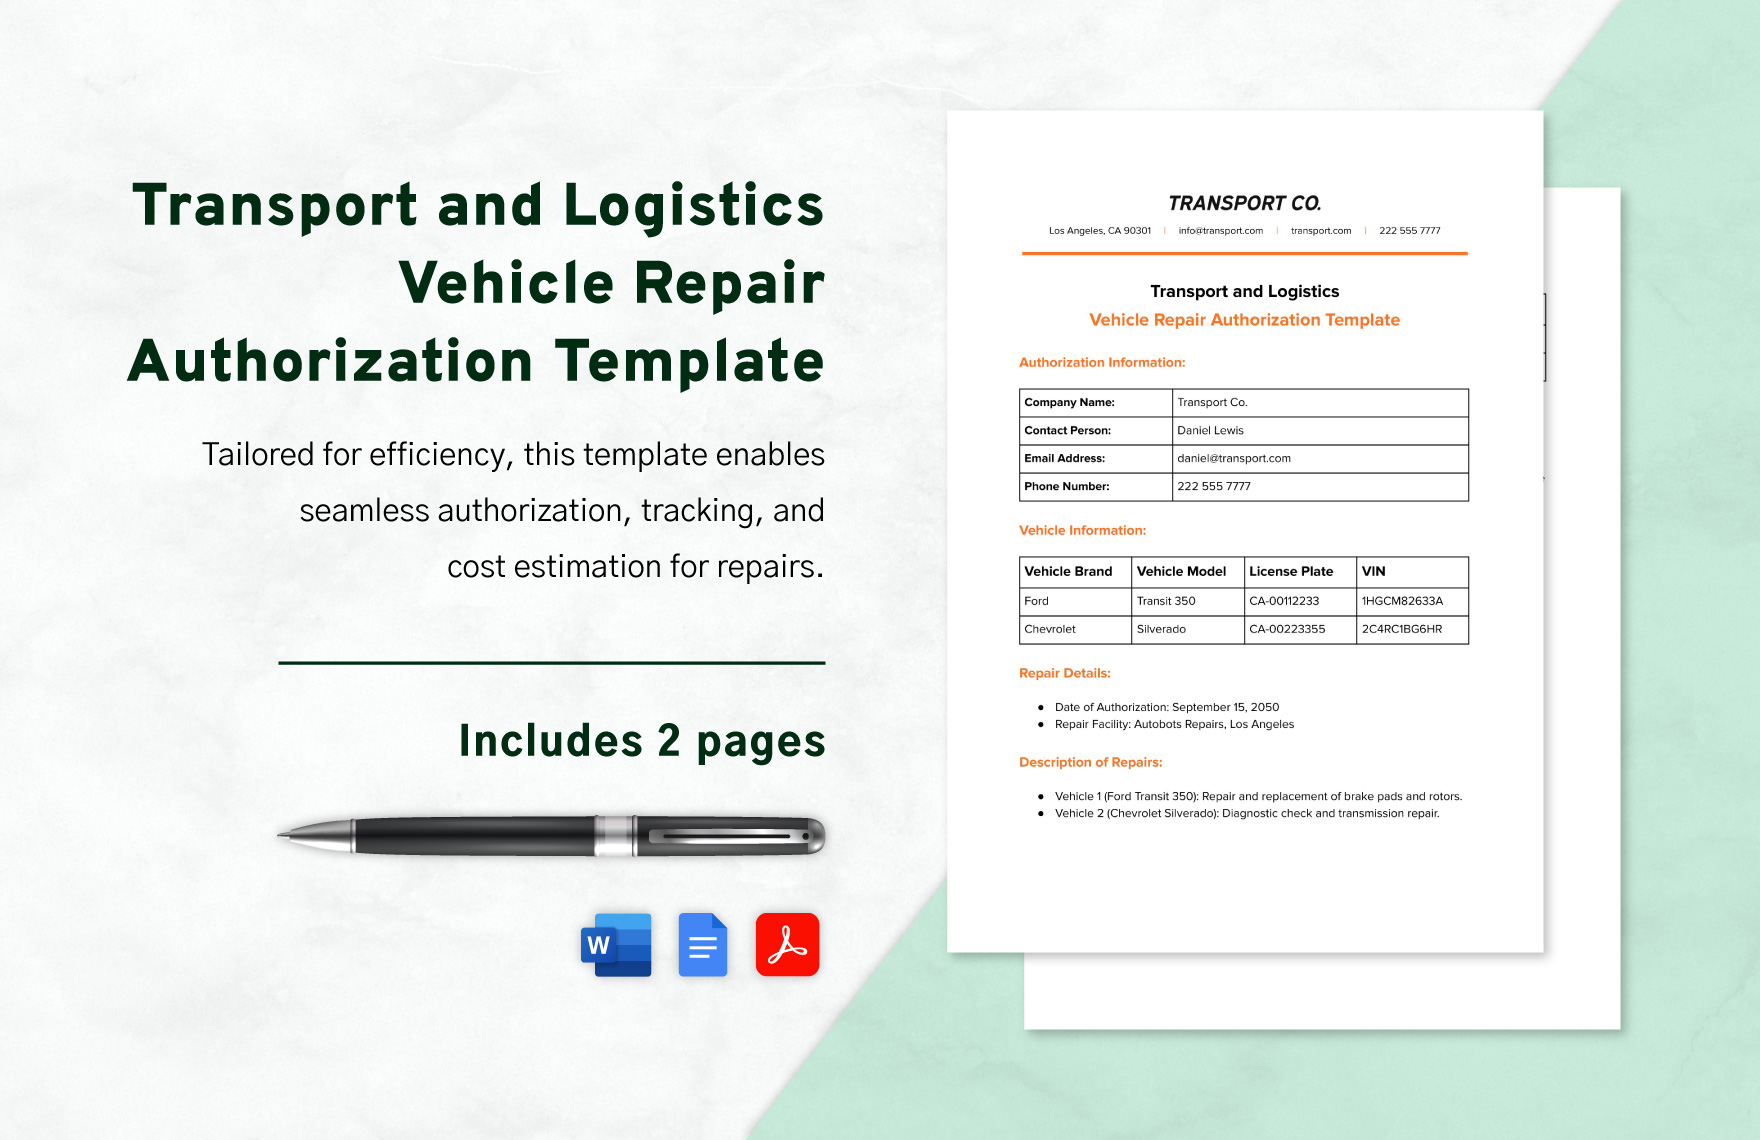 Transport and Logistics Vehicle Repair Authorization Template